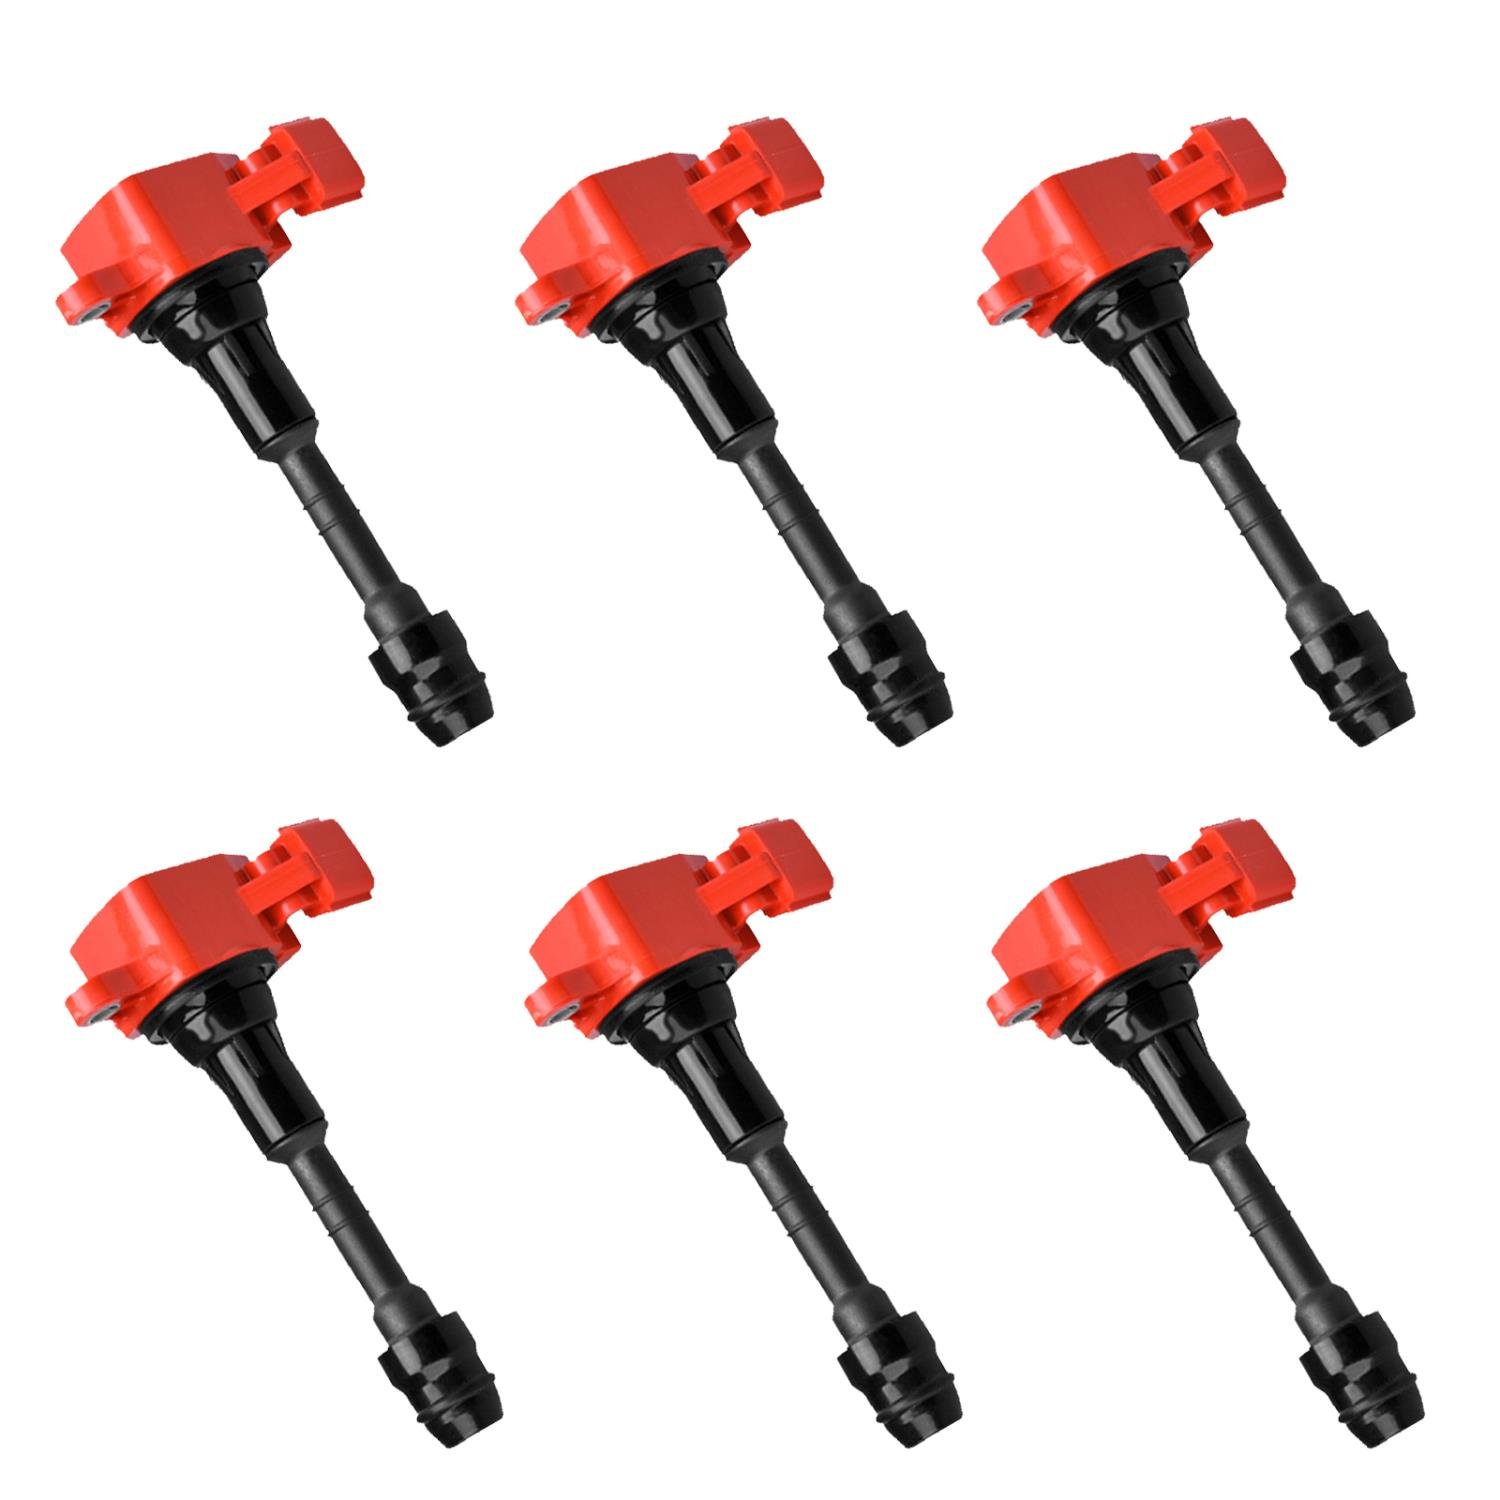 High-Performance Ignition Coils for Nissan Altima [Red]